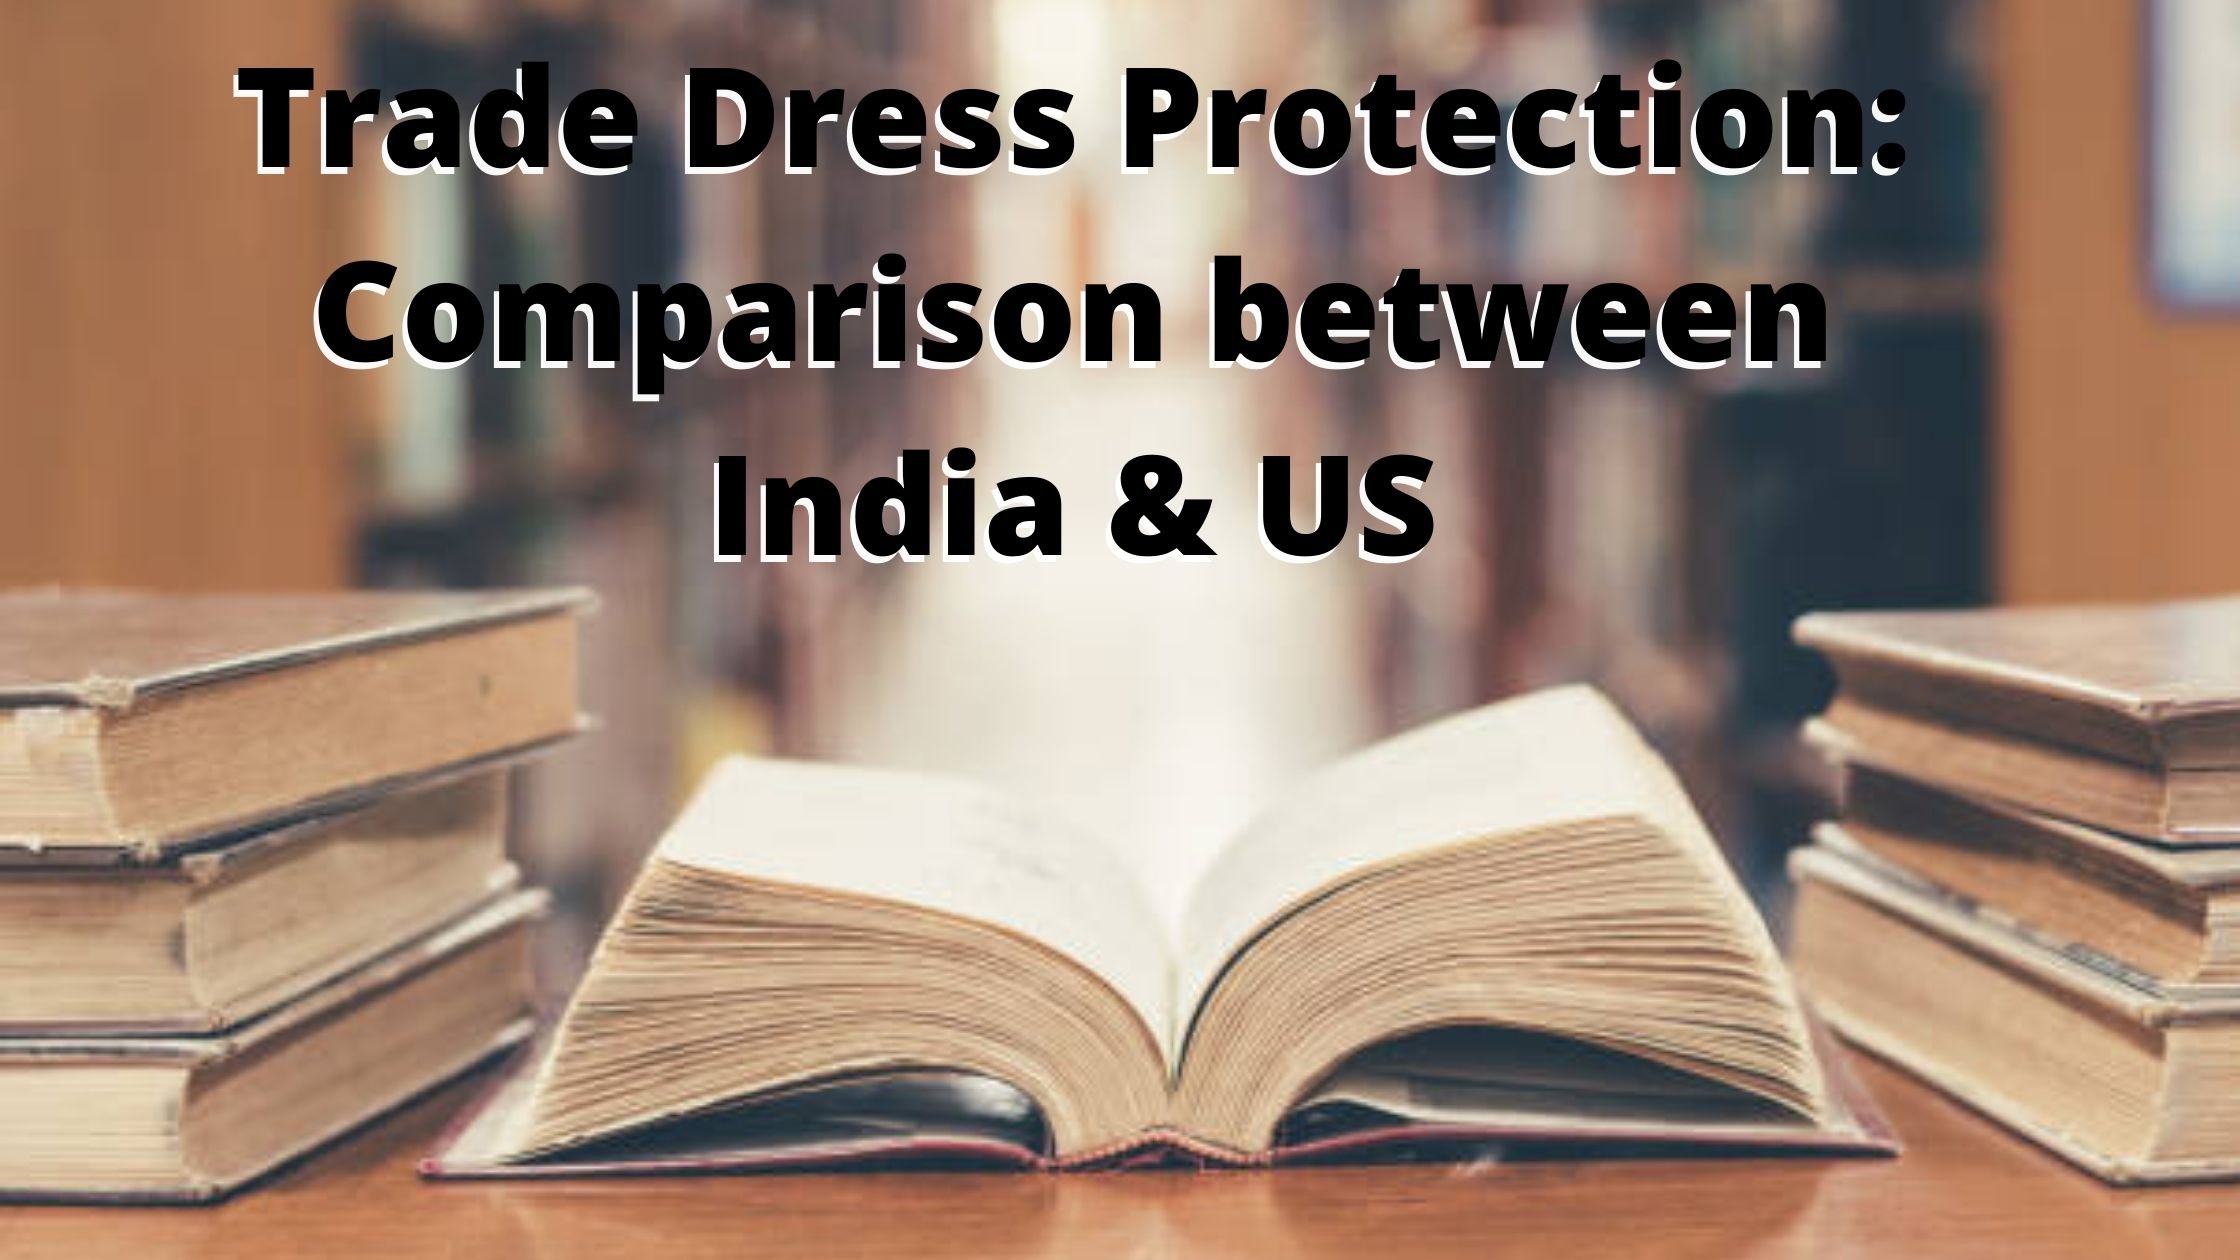 PROTECTION OF TRADE DRESS- COMPARISON BETWEEN INDIA AND US